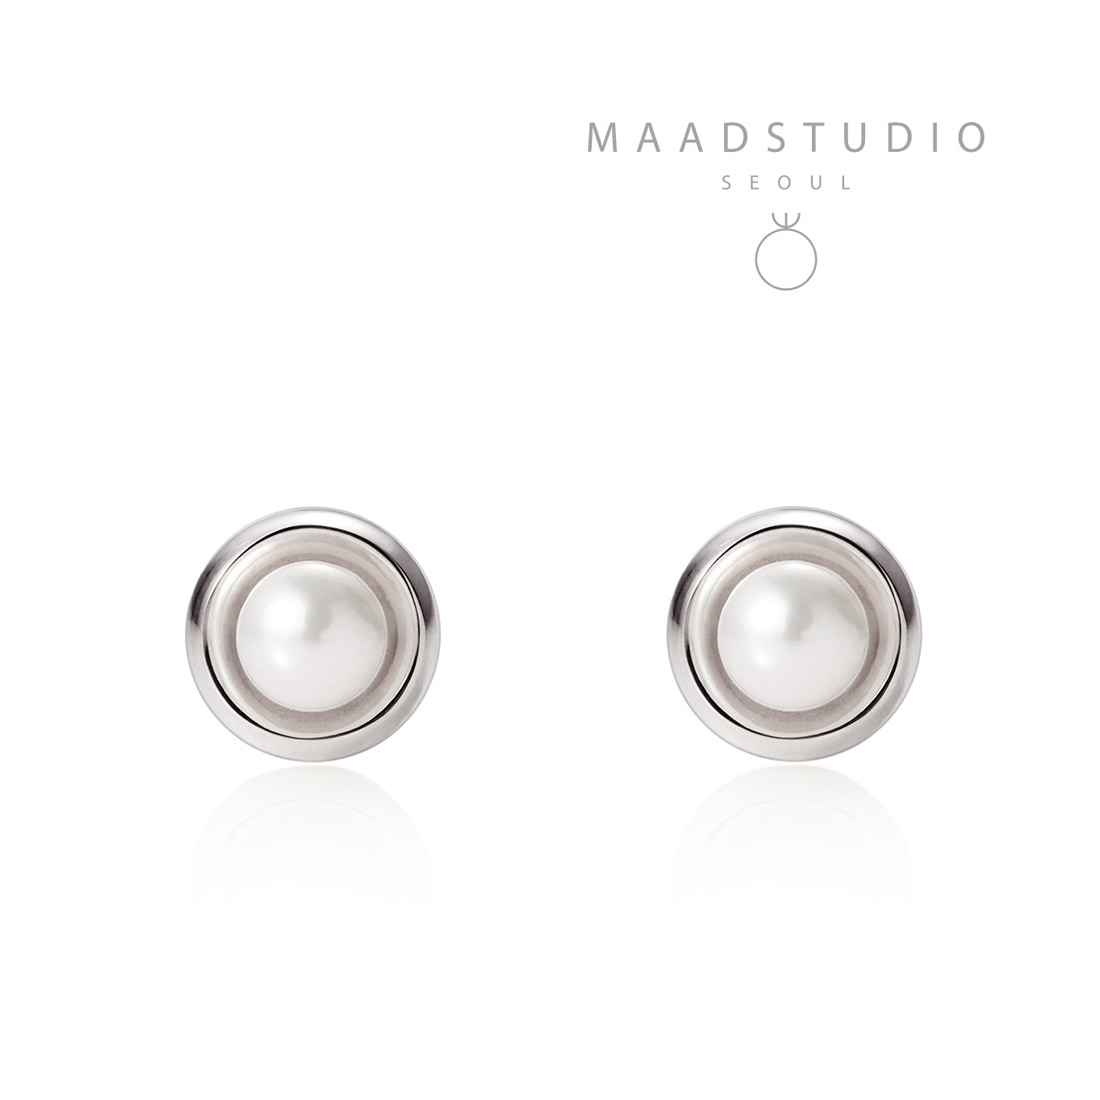 Cheese earring 14k white gold 3mm south sea pearl